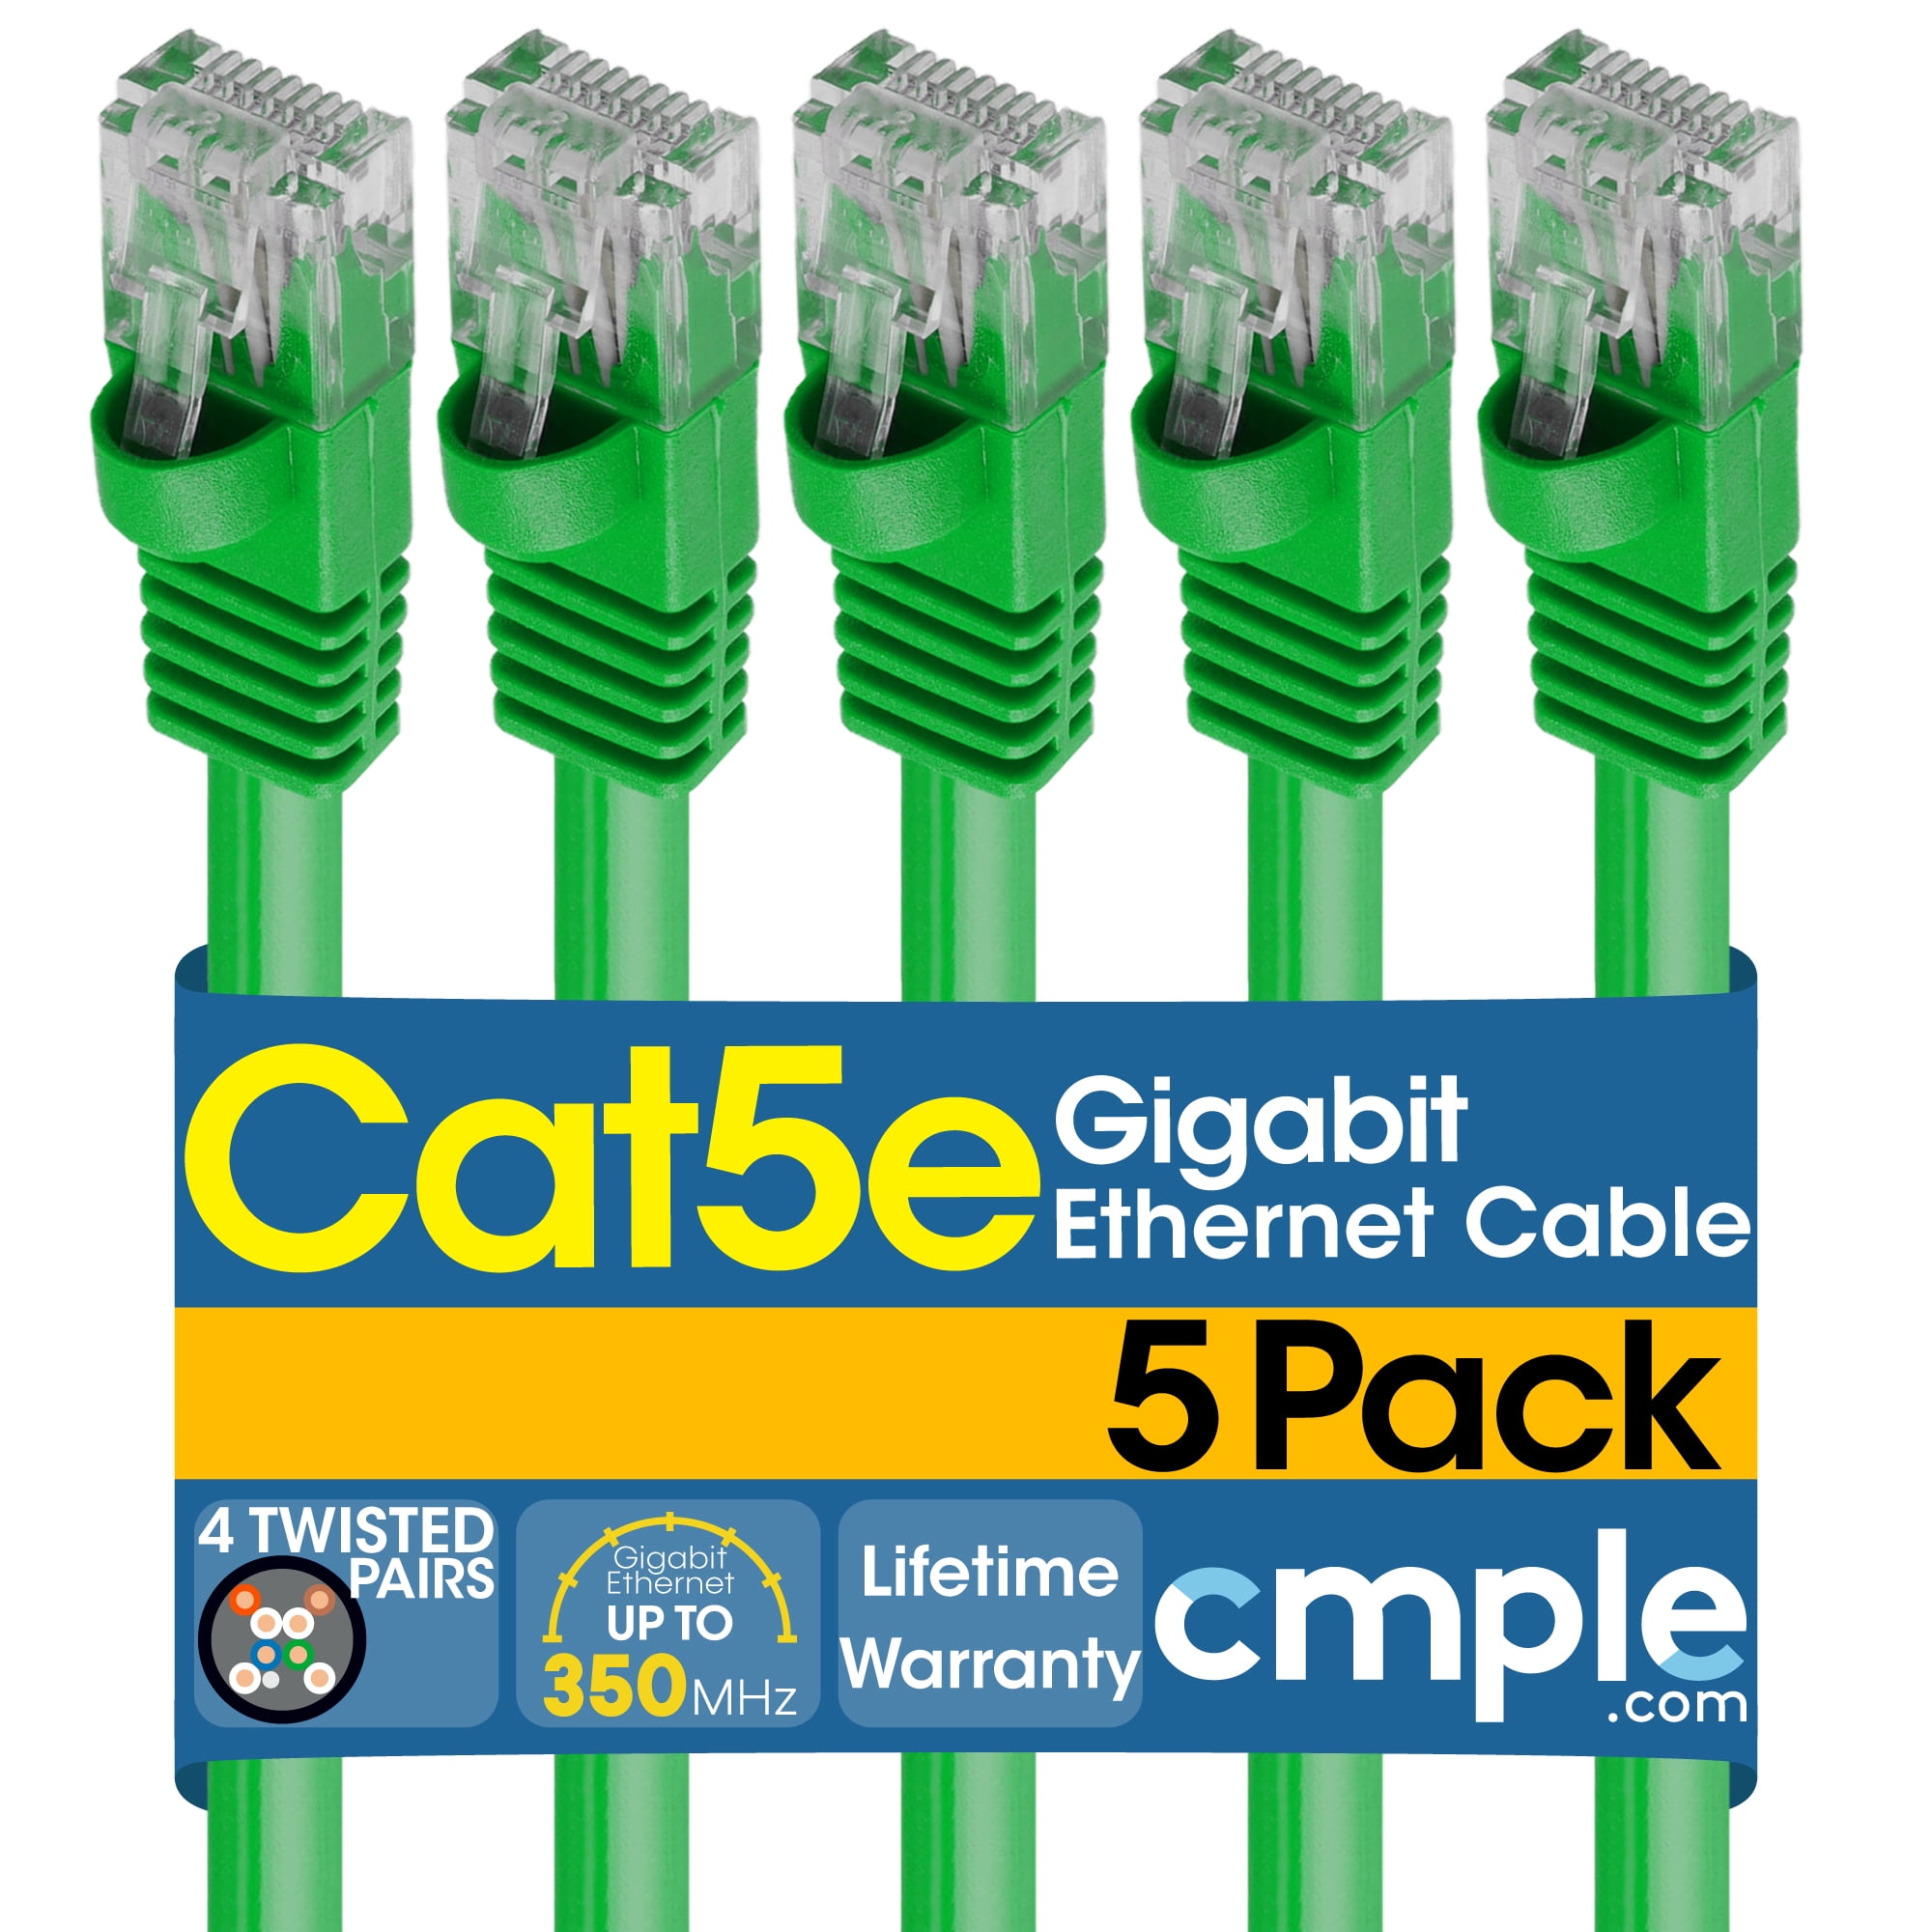 Cmple - [5 PACK] 1.5 Feet Cat5e Cable, Ethernet Patch Cord, Green